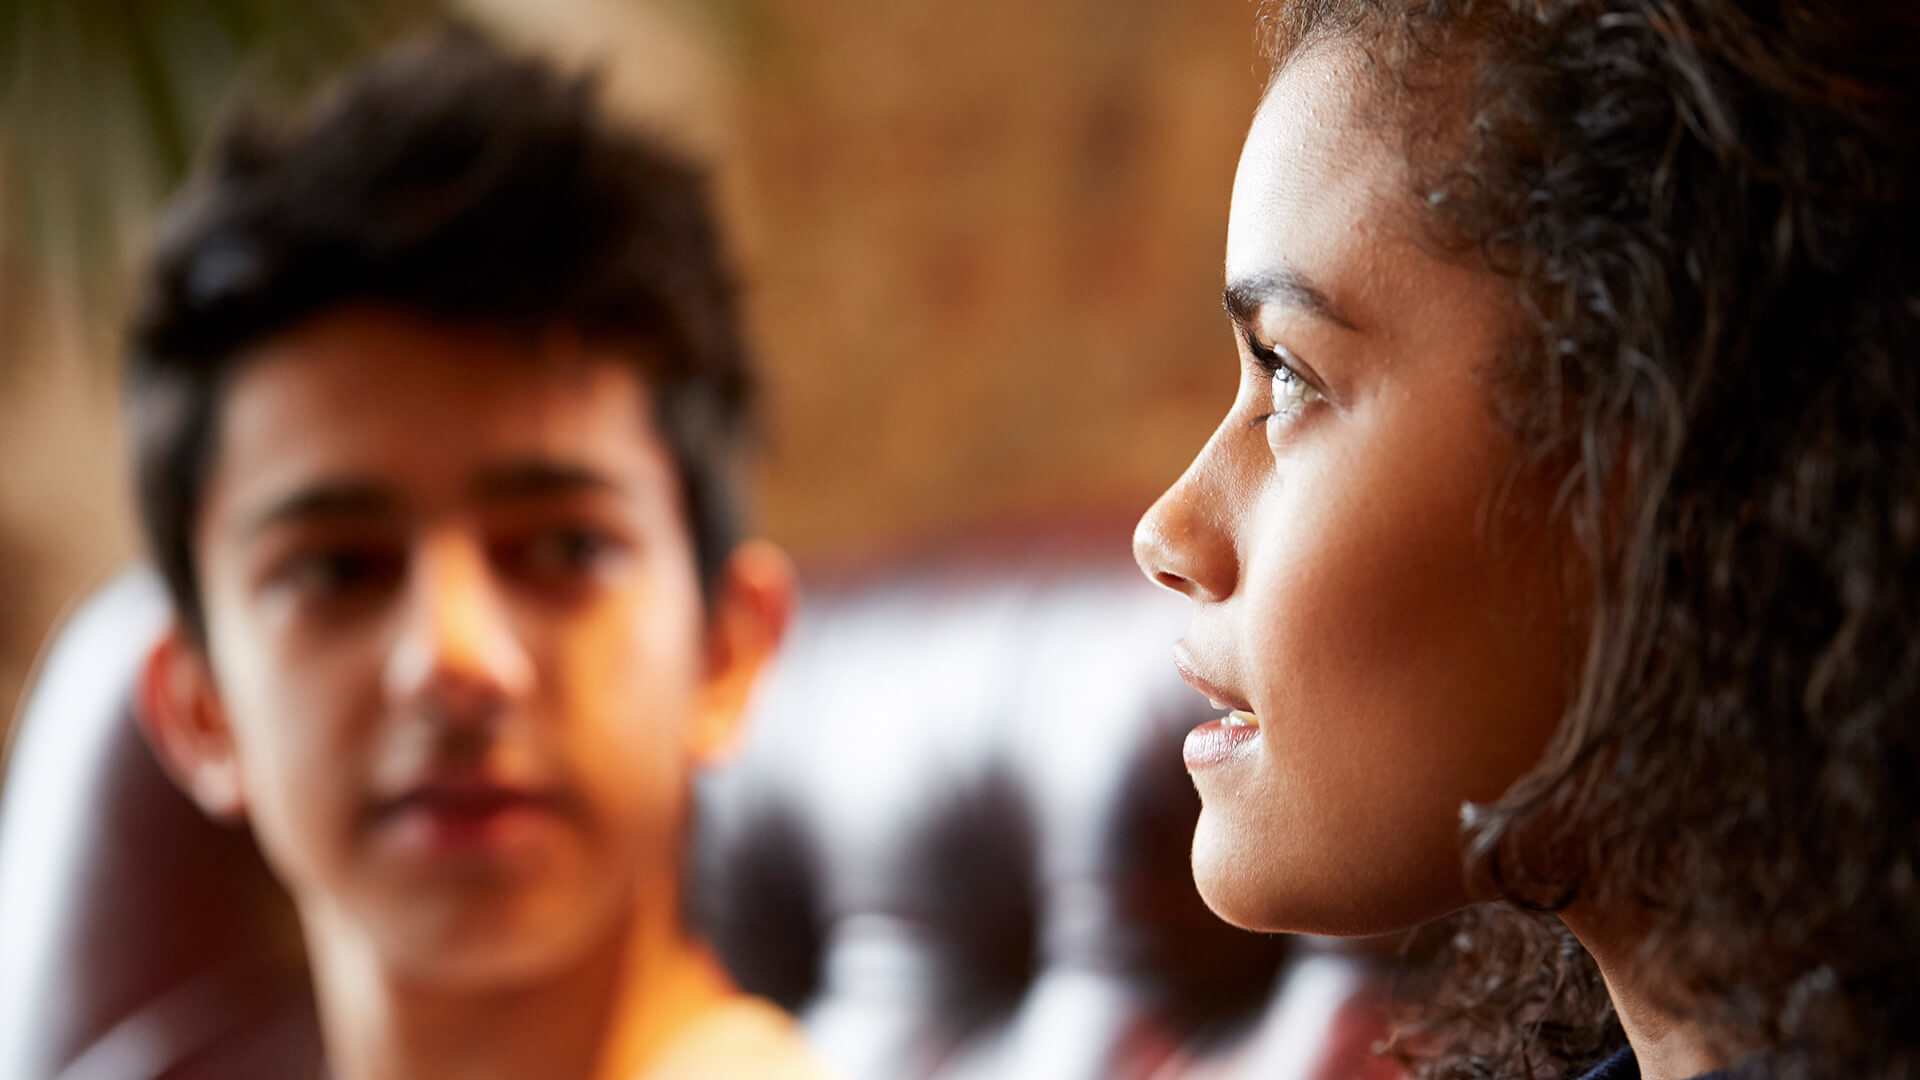 close-up-of-a-young-woman-talking-while-looking-away-and-a-young-man-on-background-looking-at-the-girl-while-she-talks